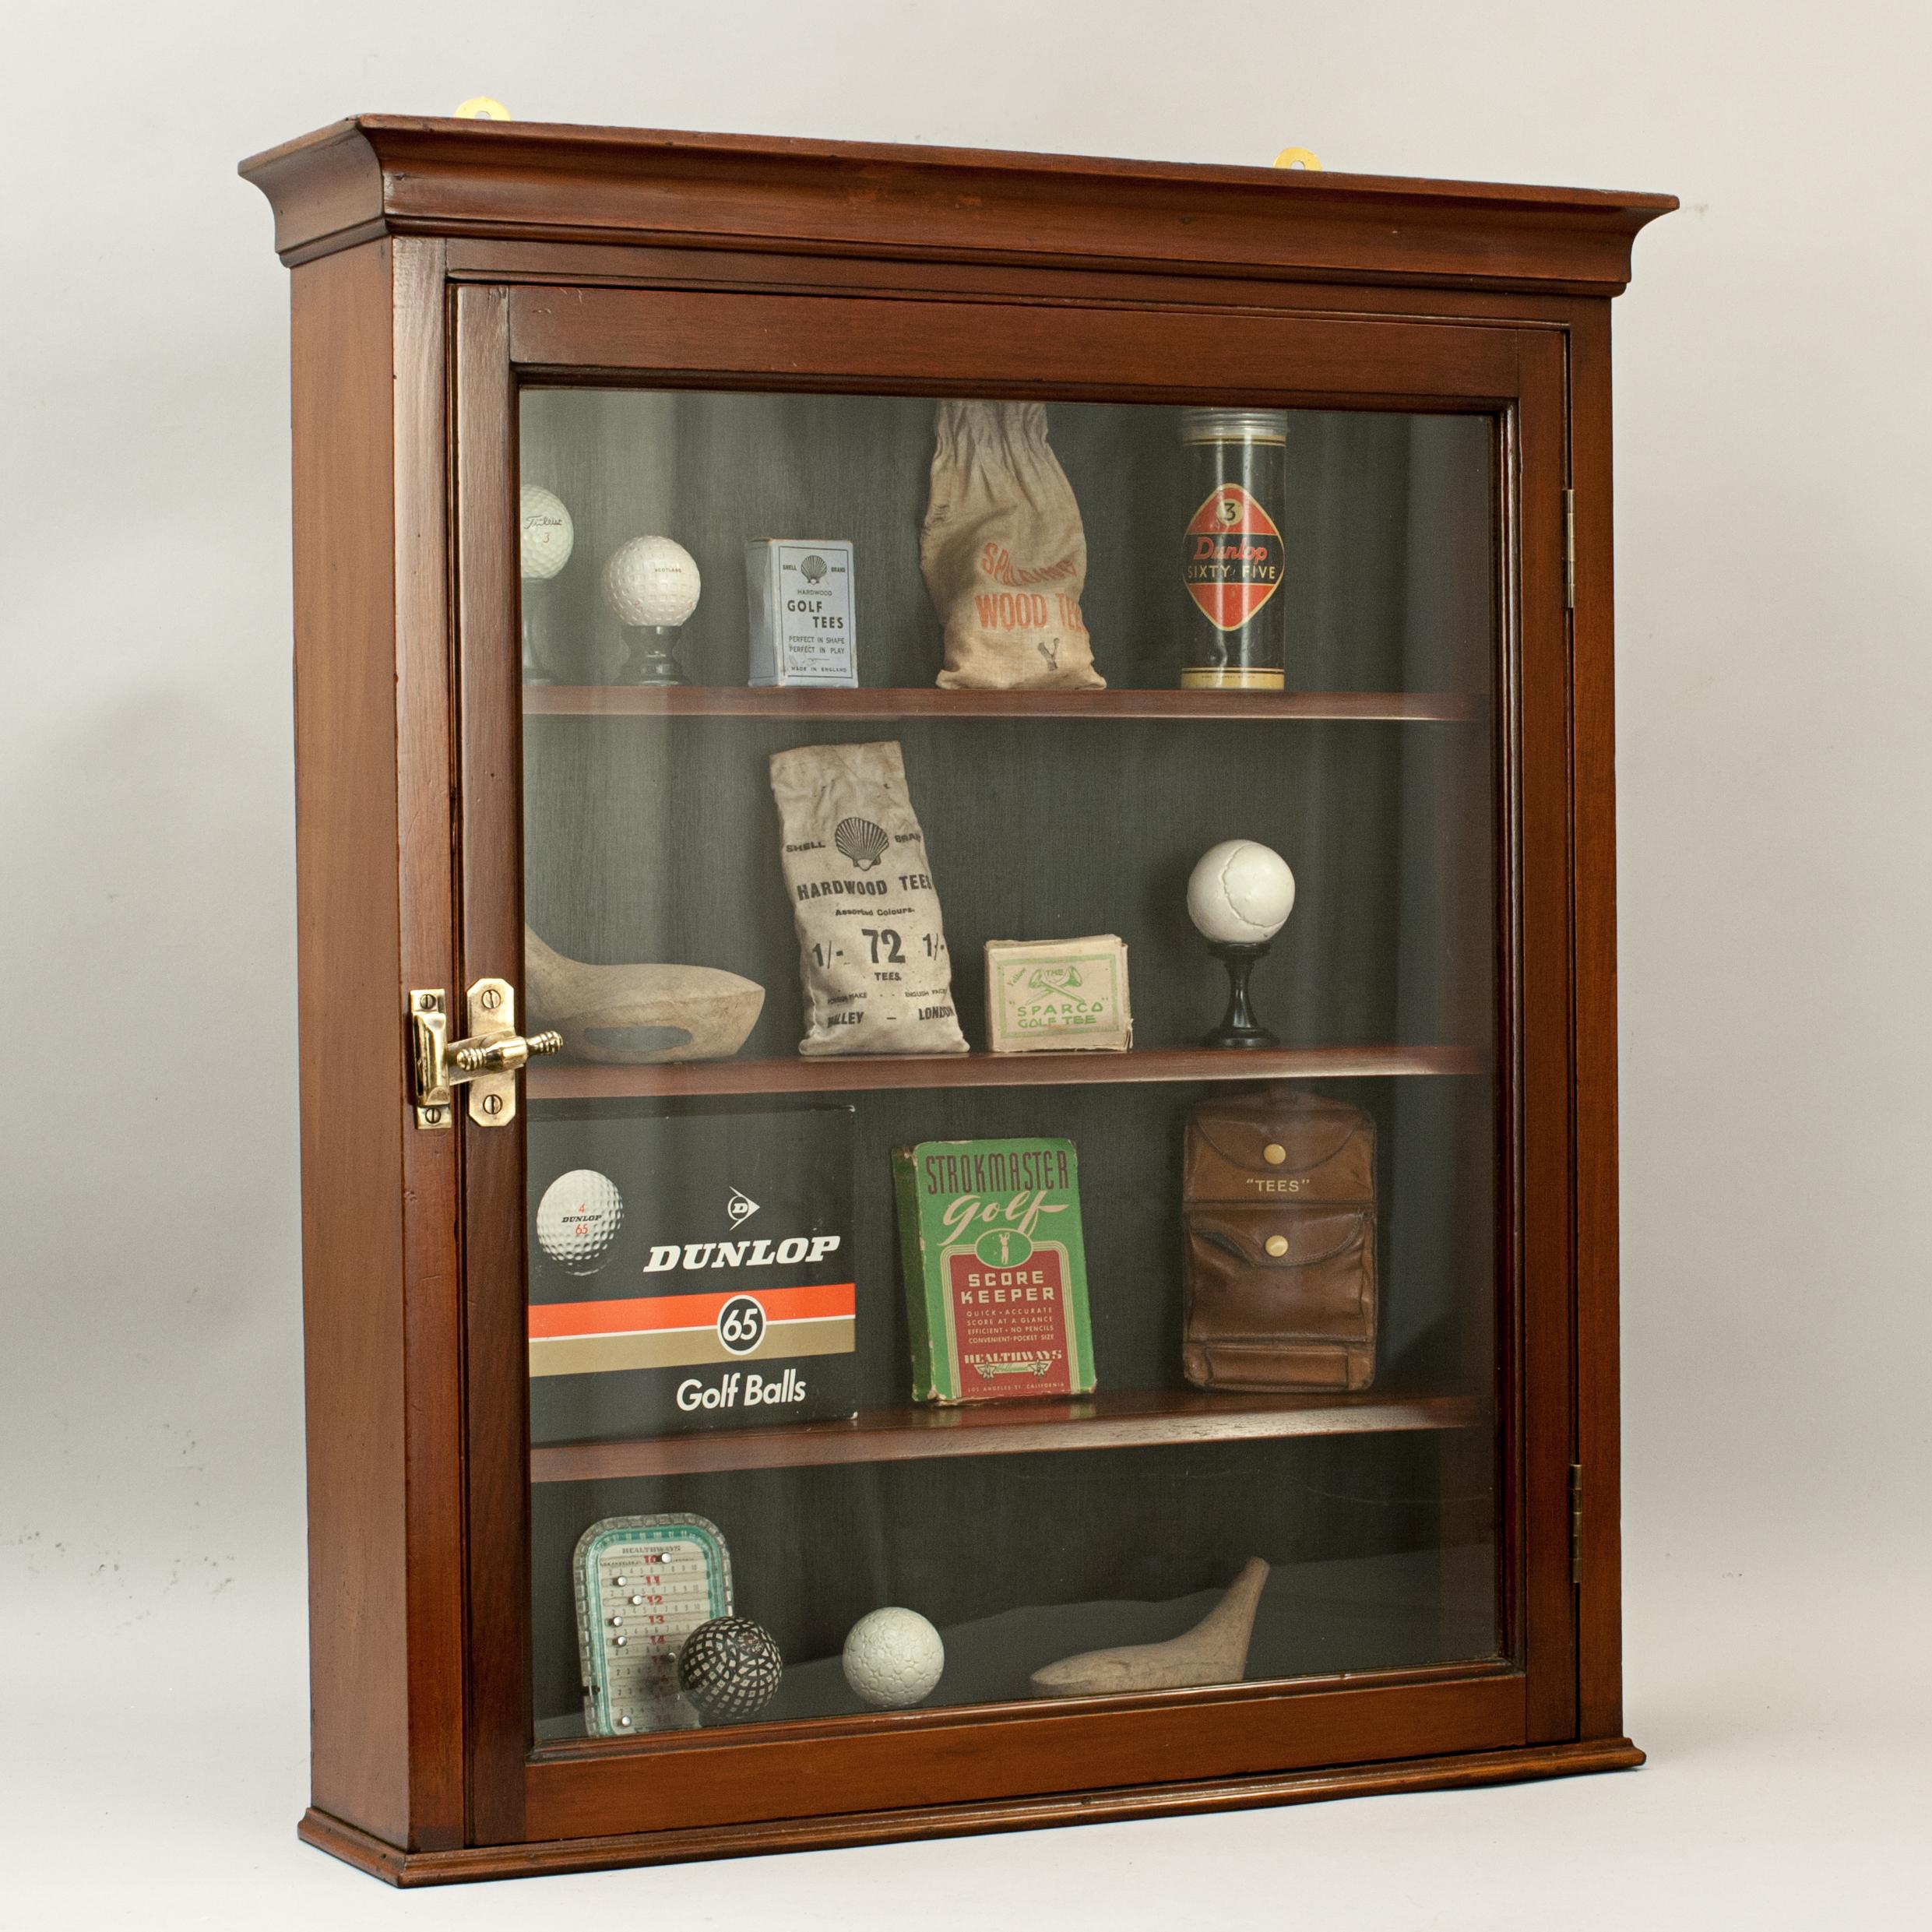 Early 20th Century Golf Ball Display Cabinet